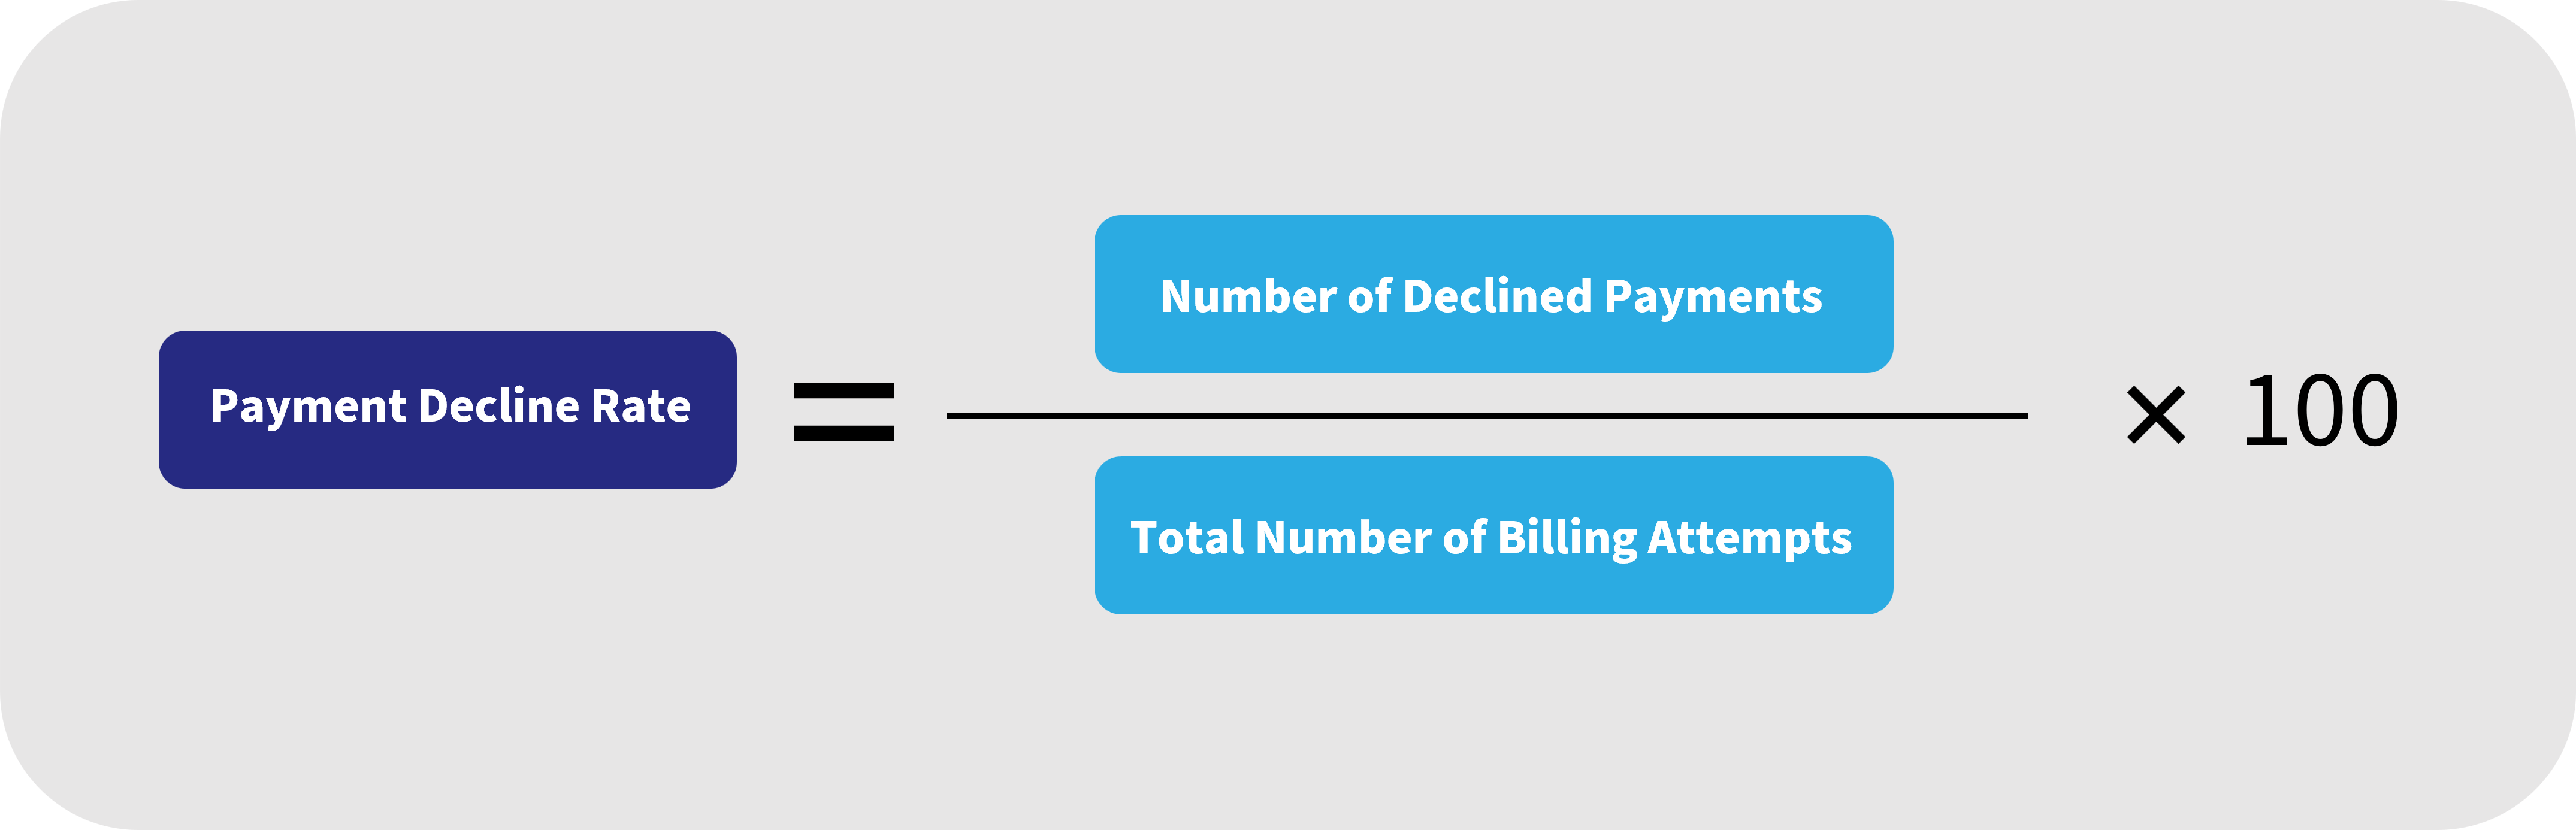 Payment Decline Rate = (Number of Declined Payments / Total Number of Billing Attempts) * 100%